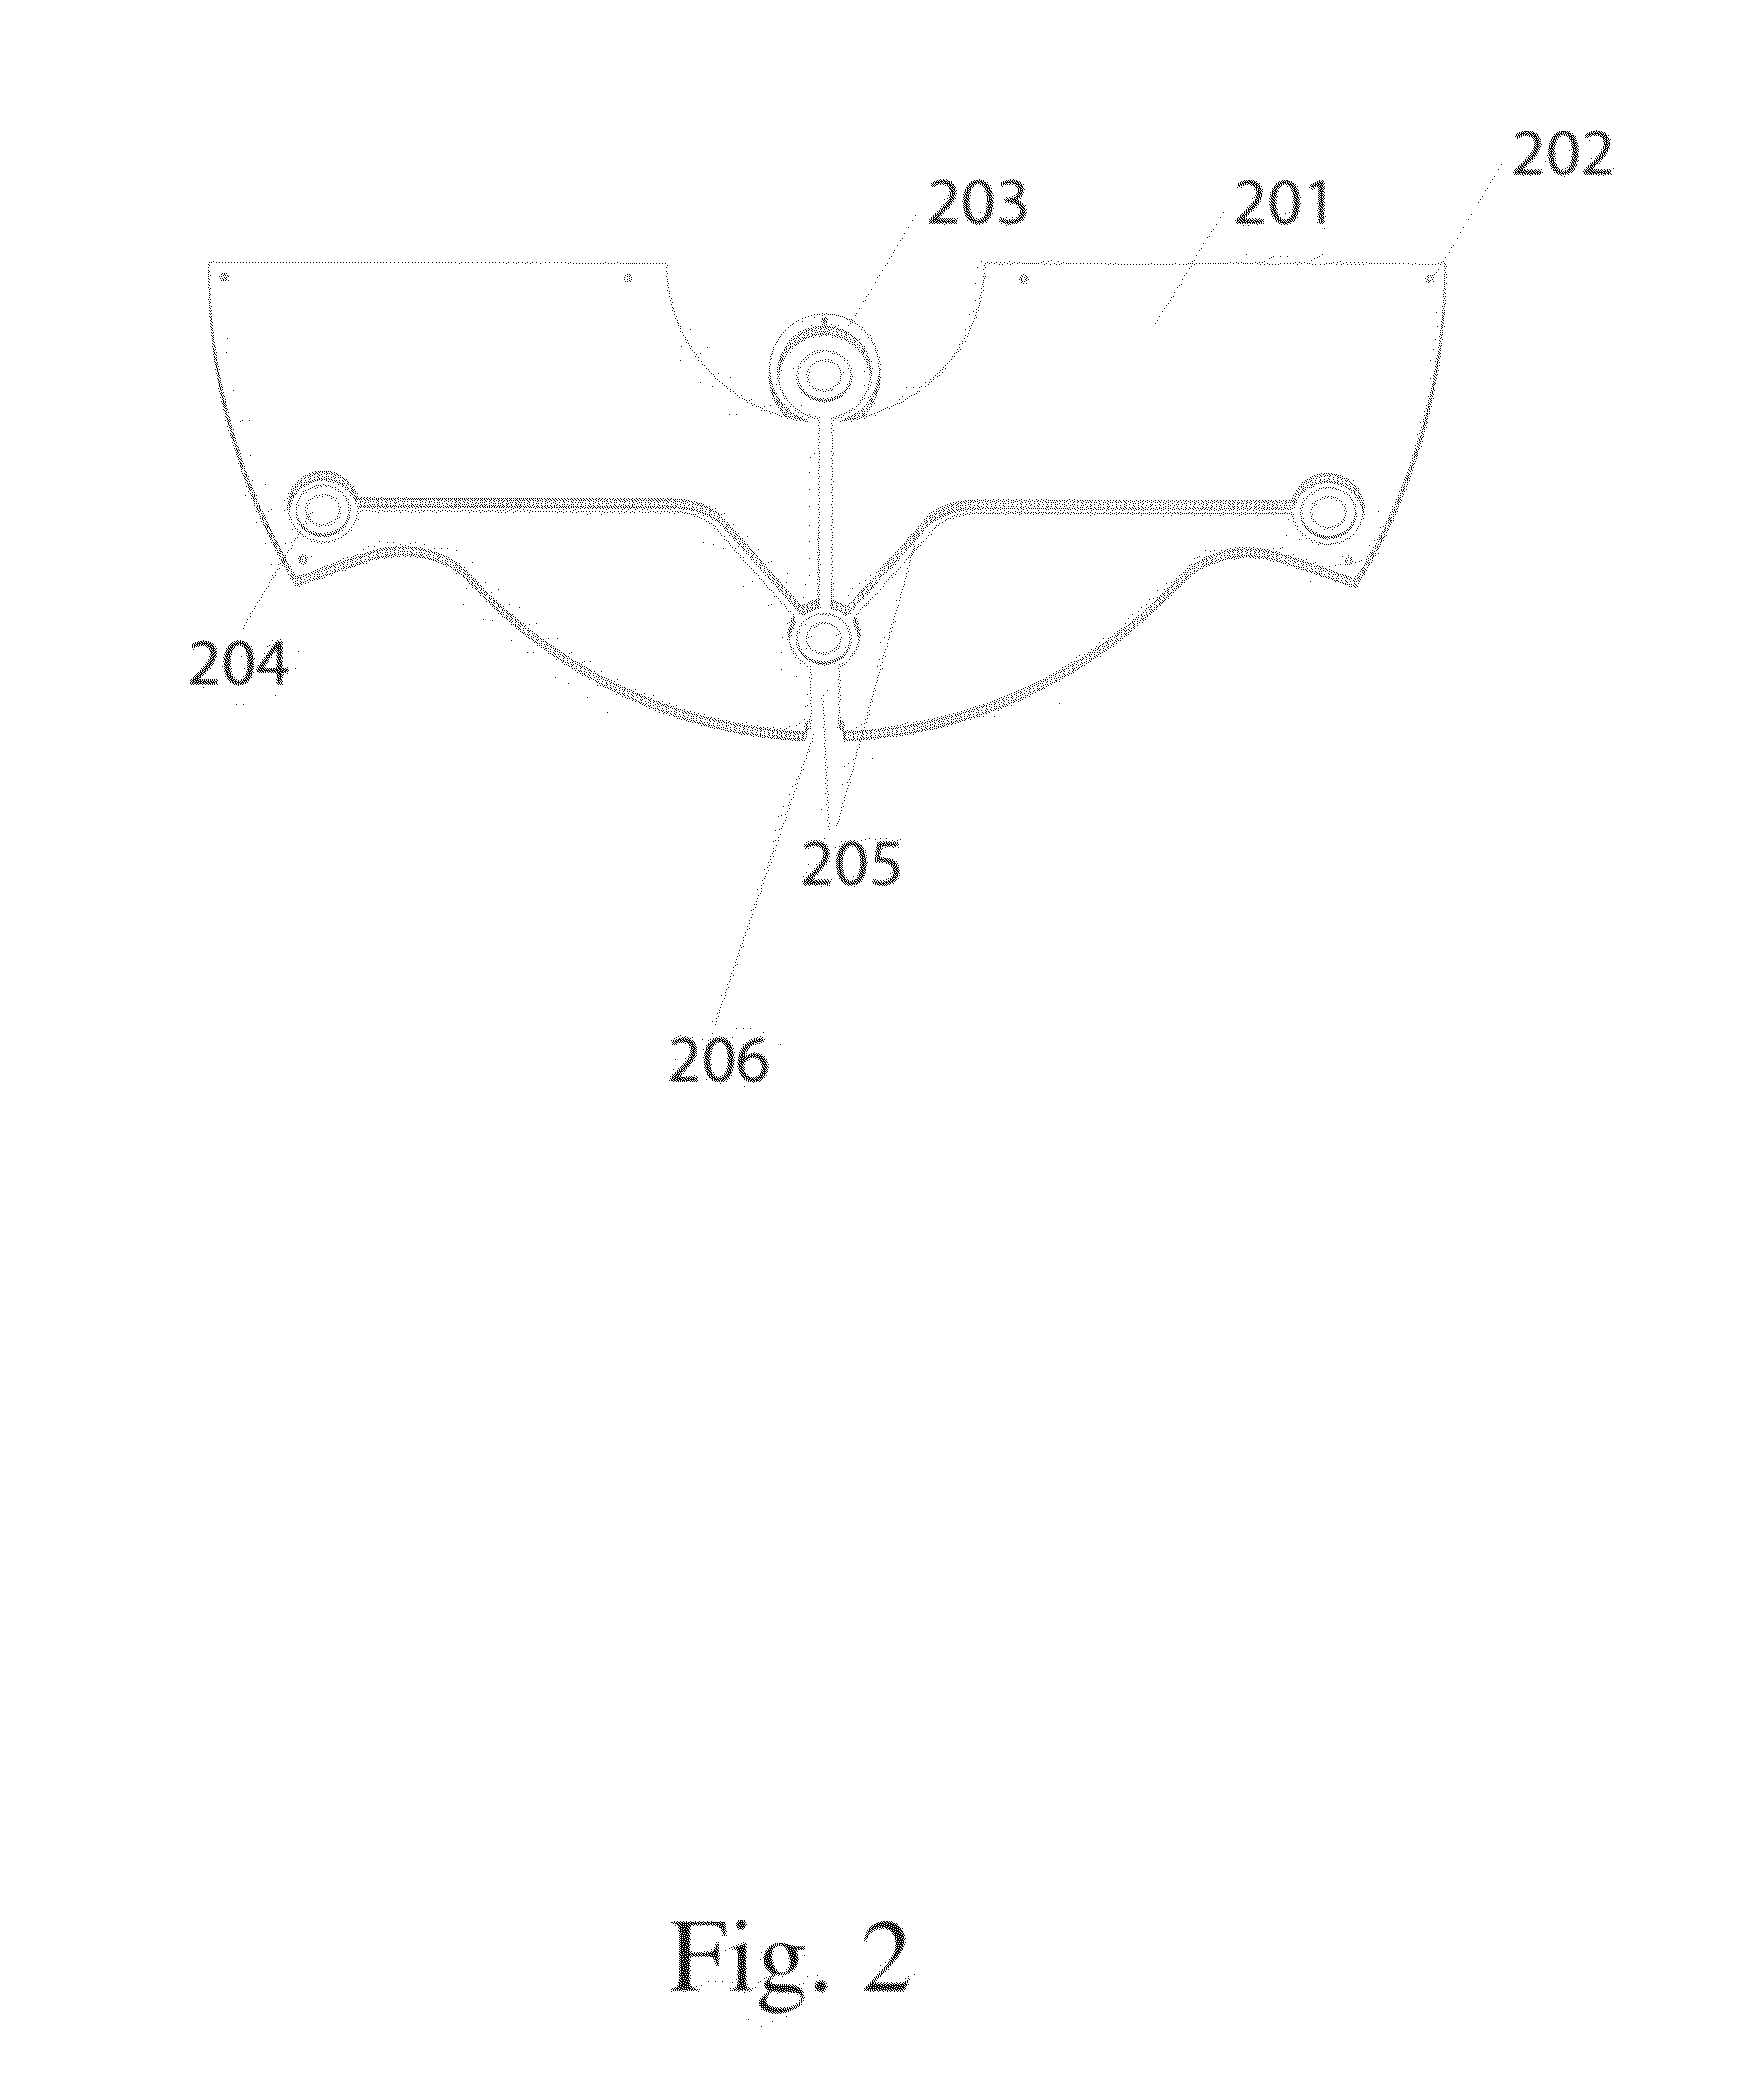 Electronic cymbal assembly with modular self-dampening triggering system